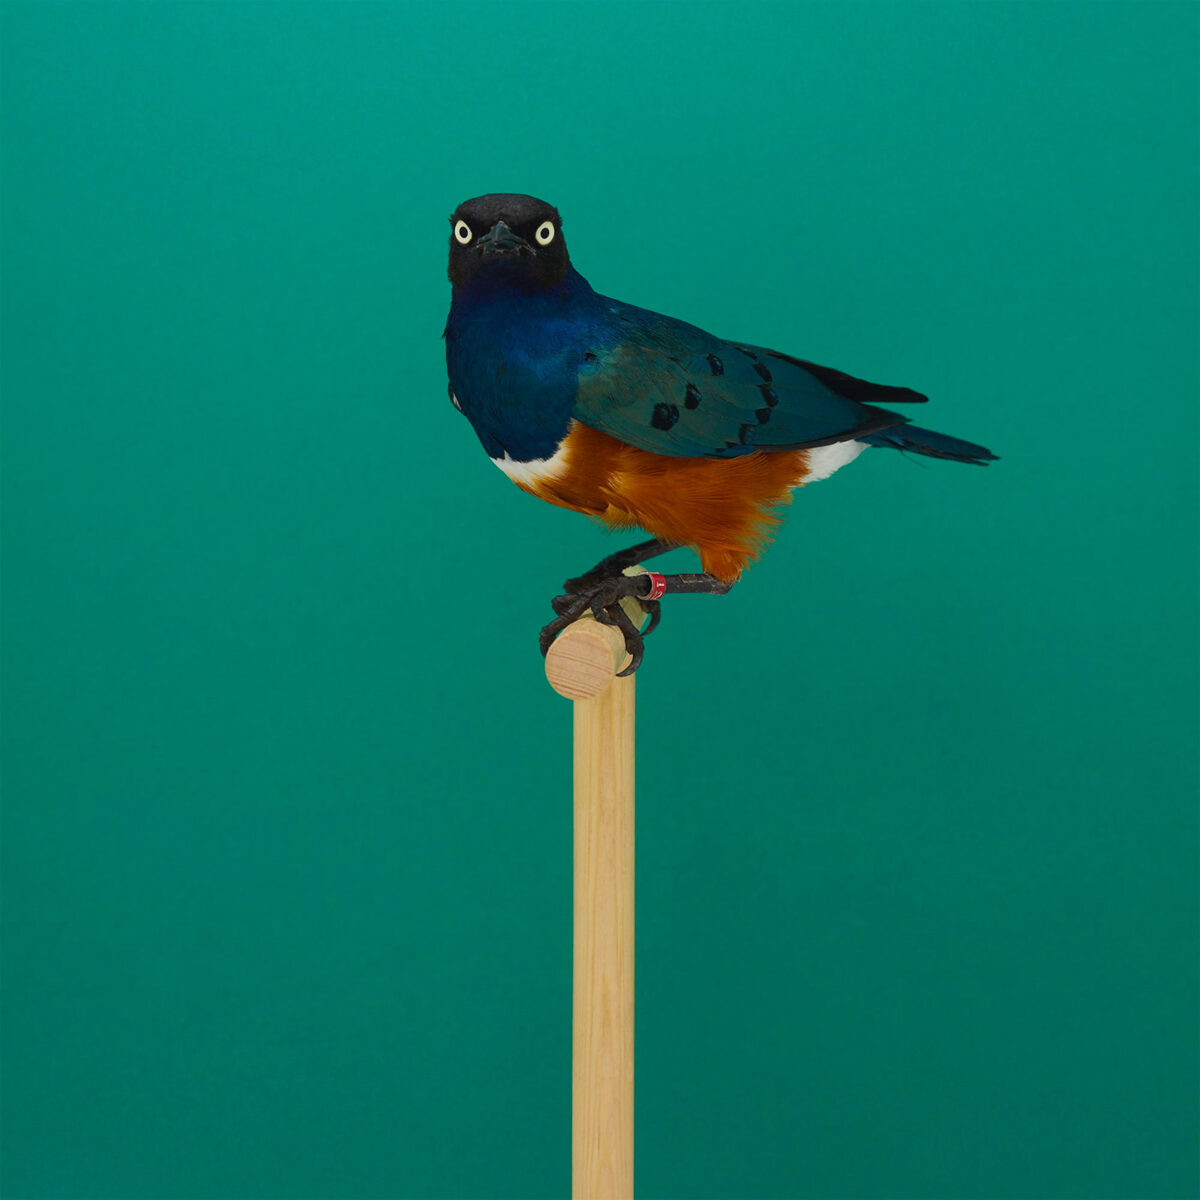 An Incomplete Dictionary Of Show Birds A Minimalist Bird Photography Series By Luke Stephenson (16)